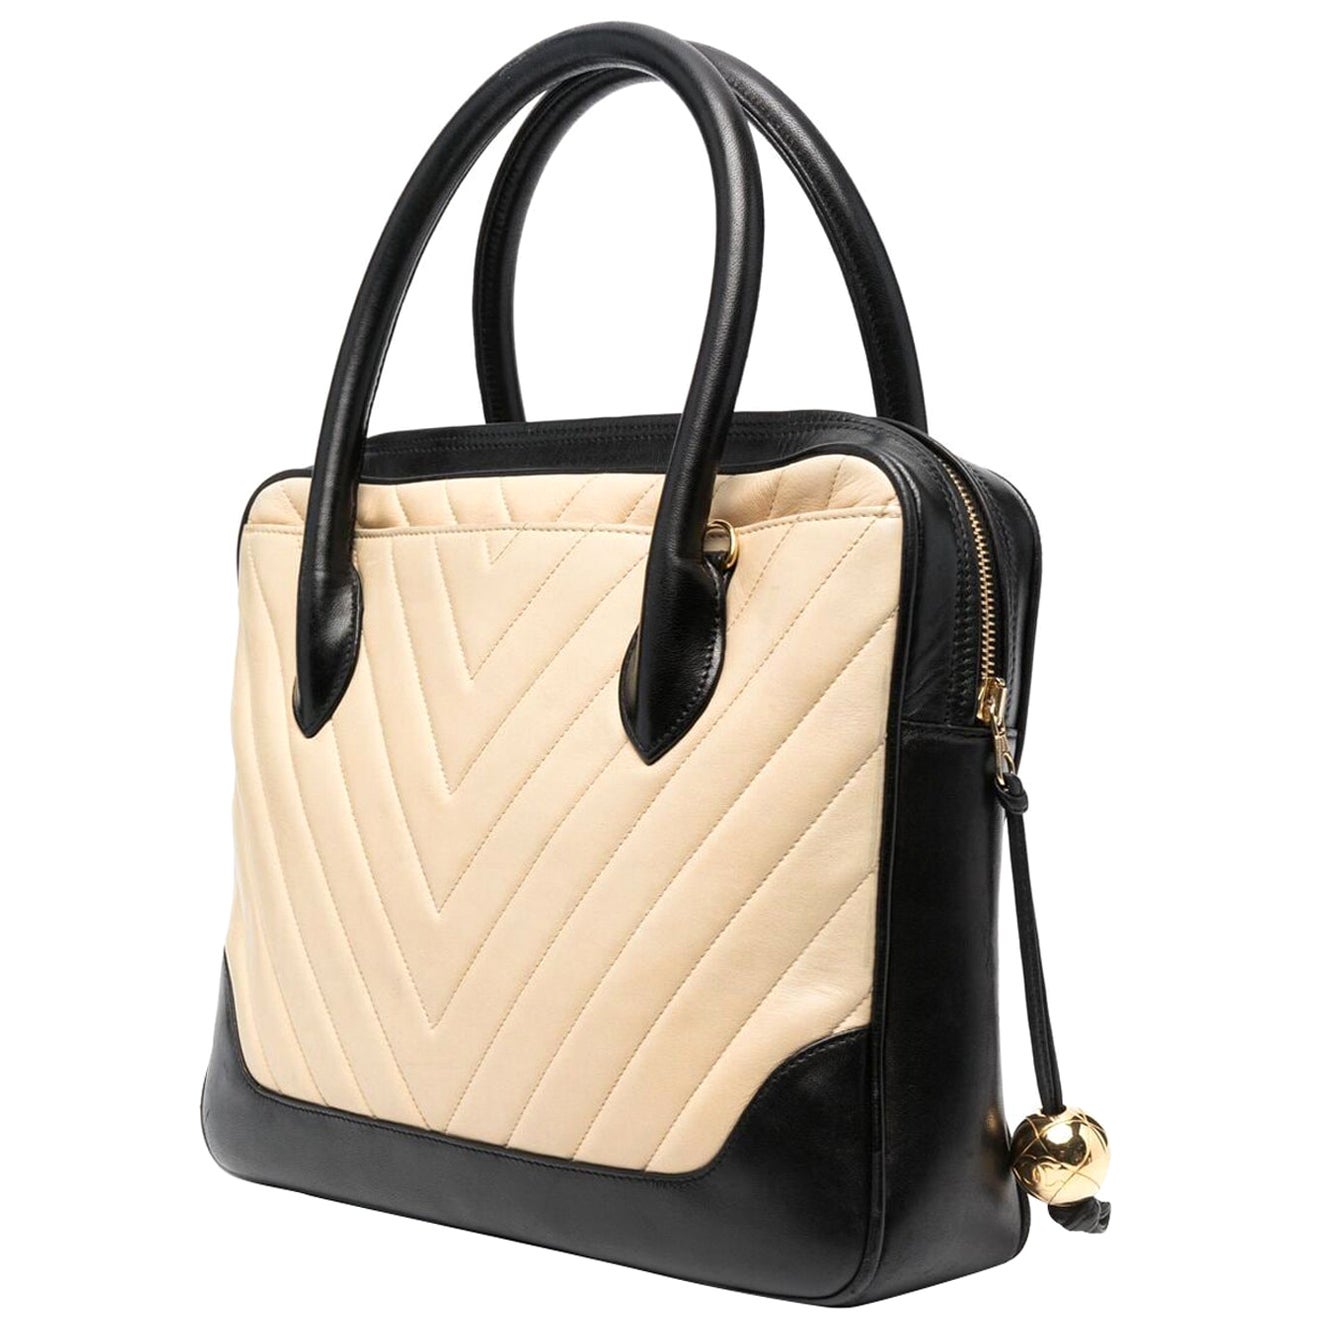 Chanel Black and Beige Quilted Leather Tote Bag